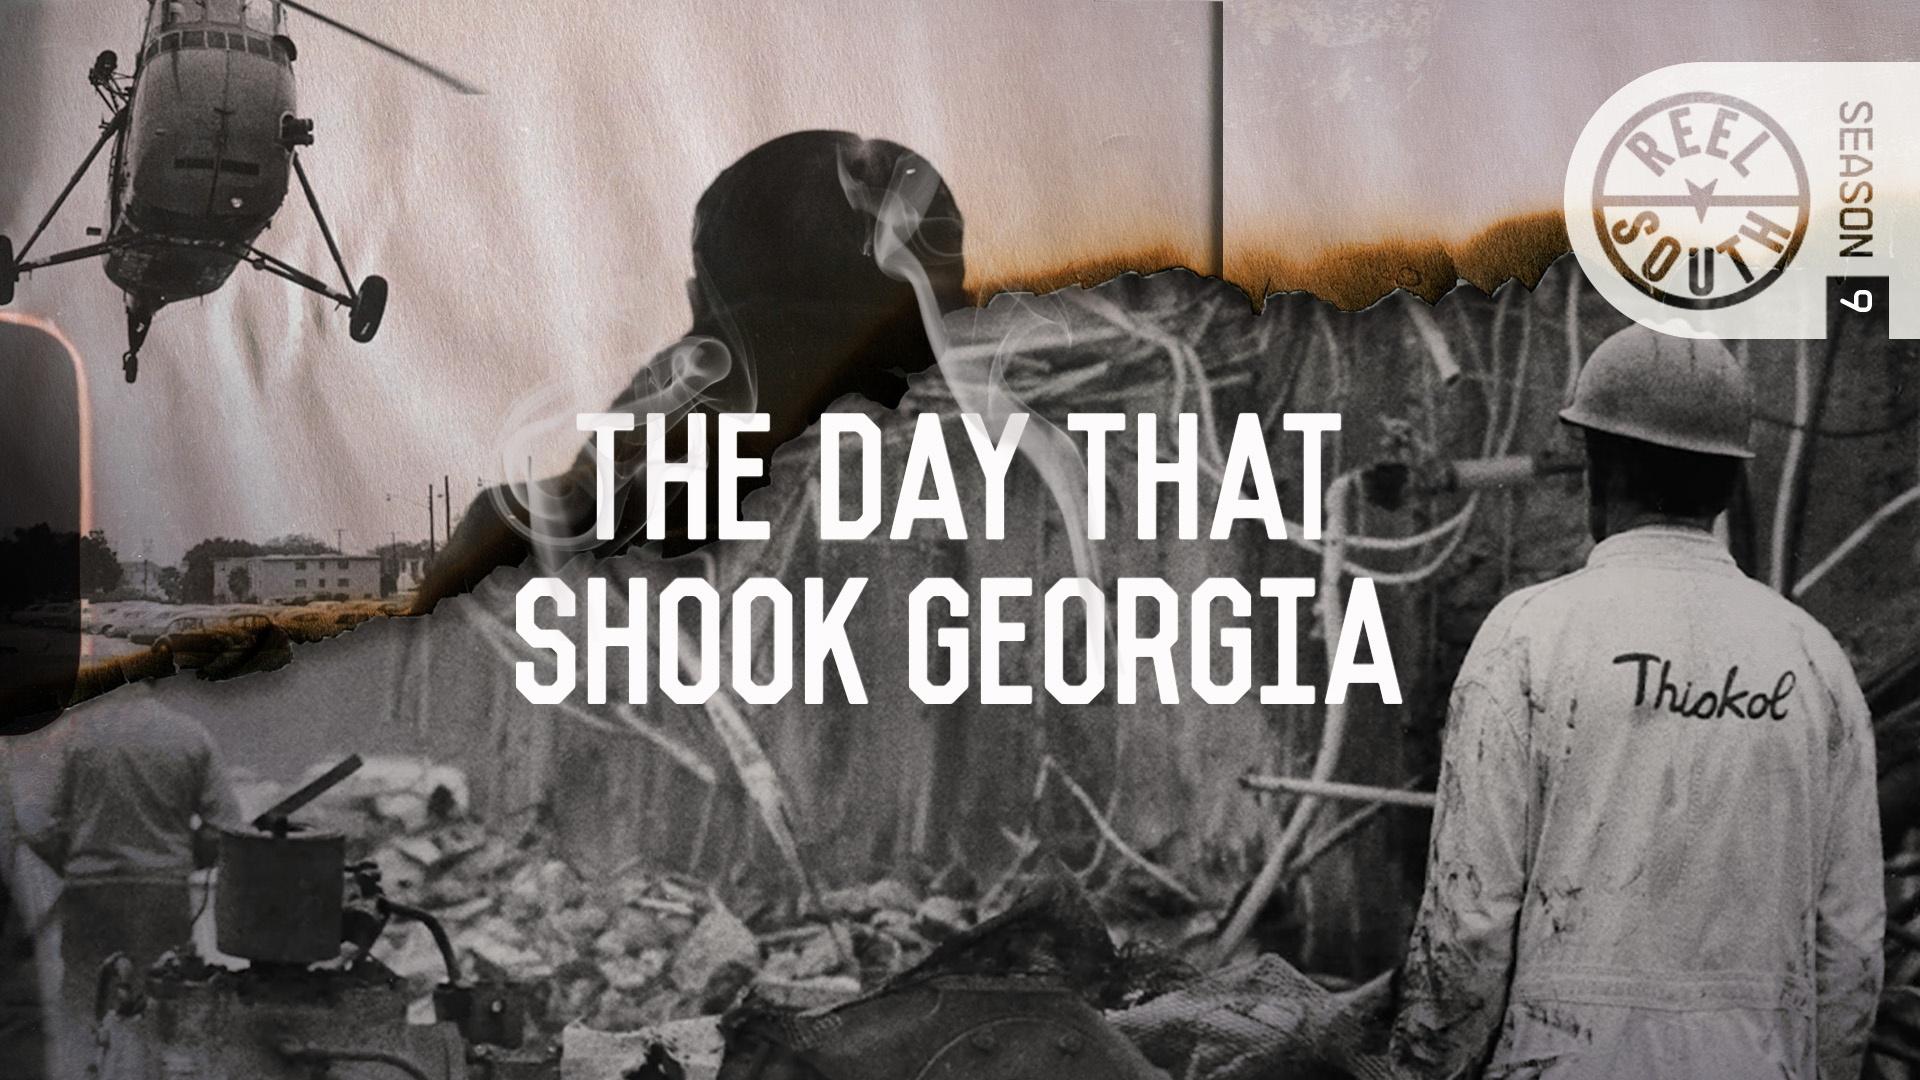 The Day That Shook Georgia key art from Season 9 of Reel South.